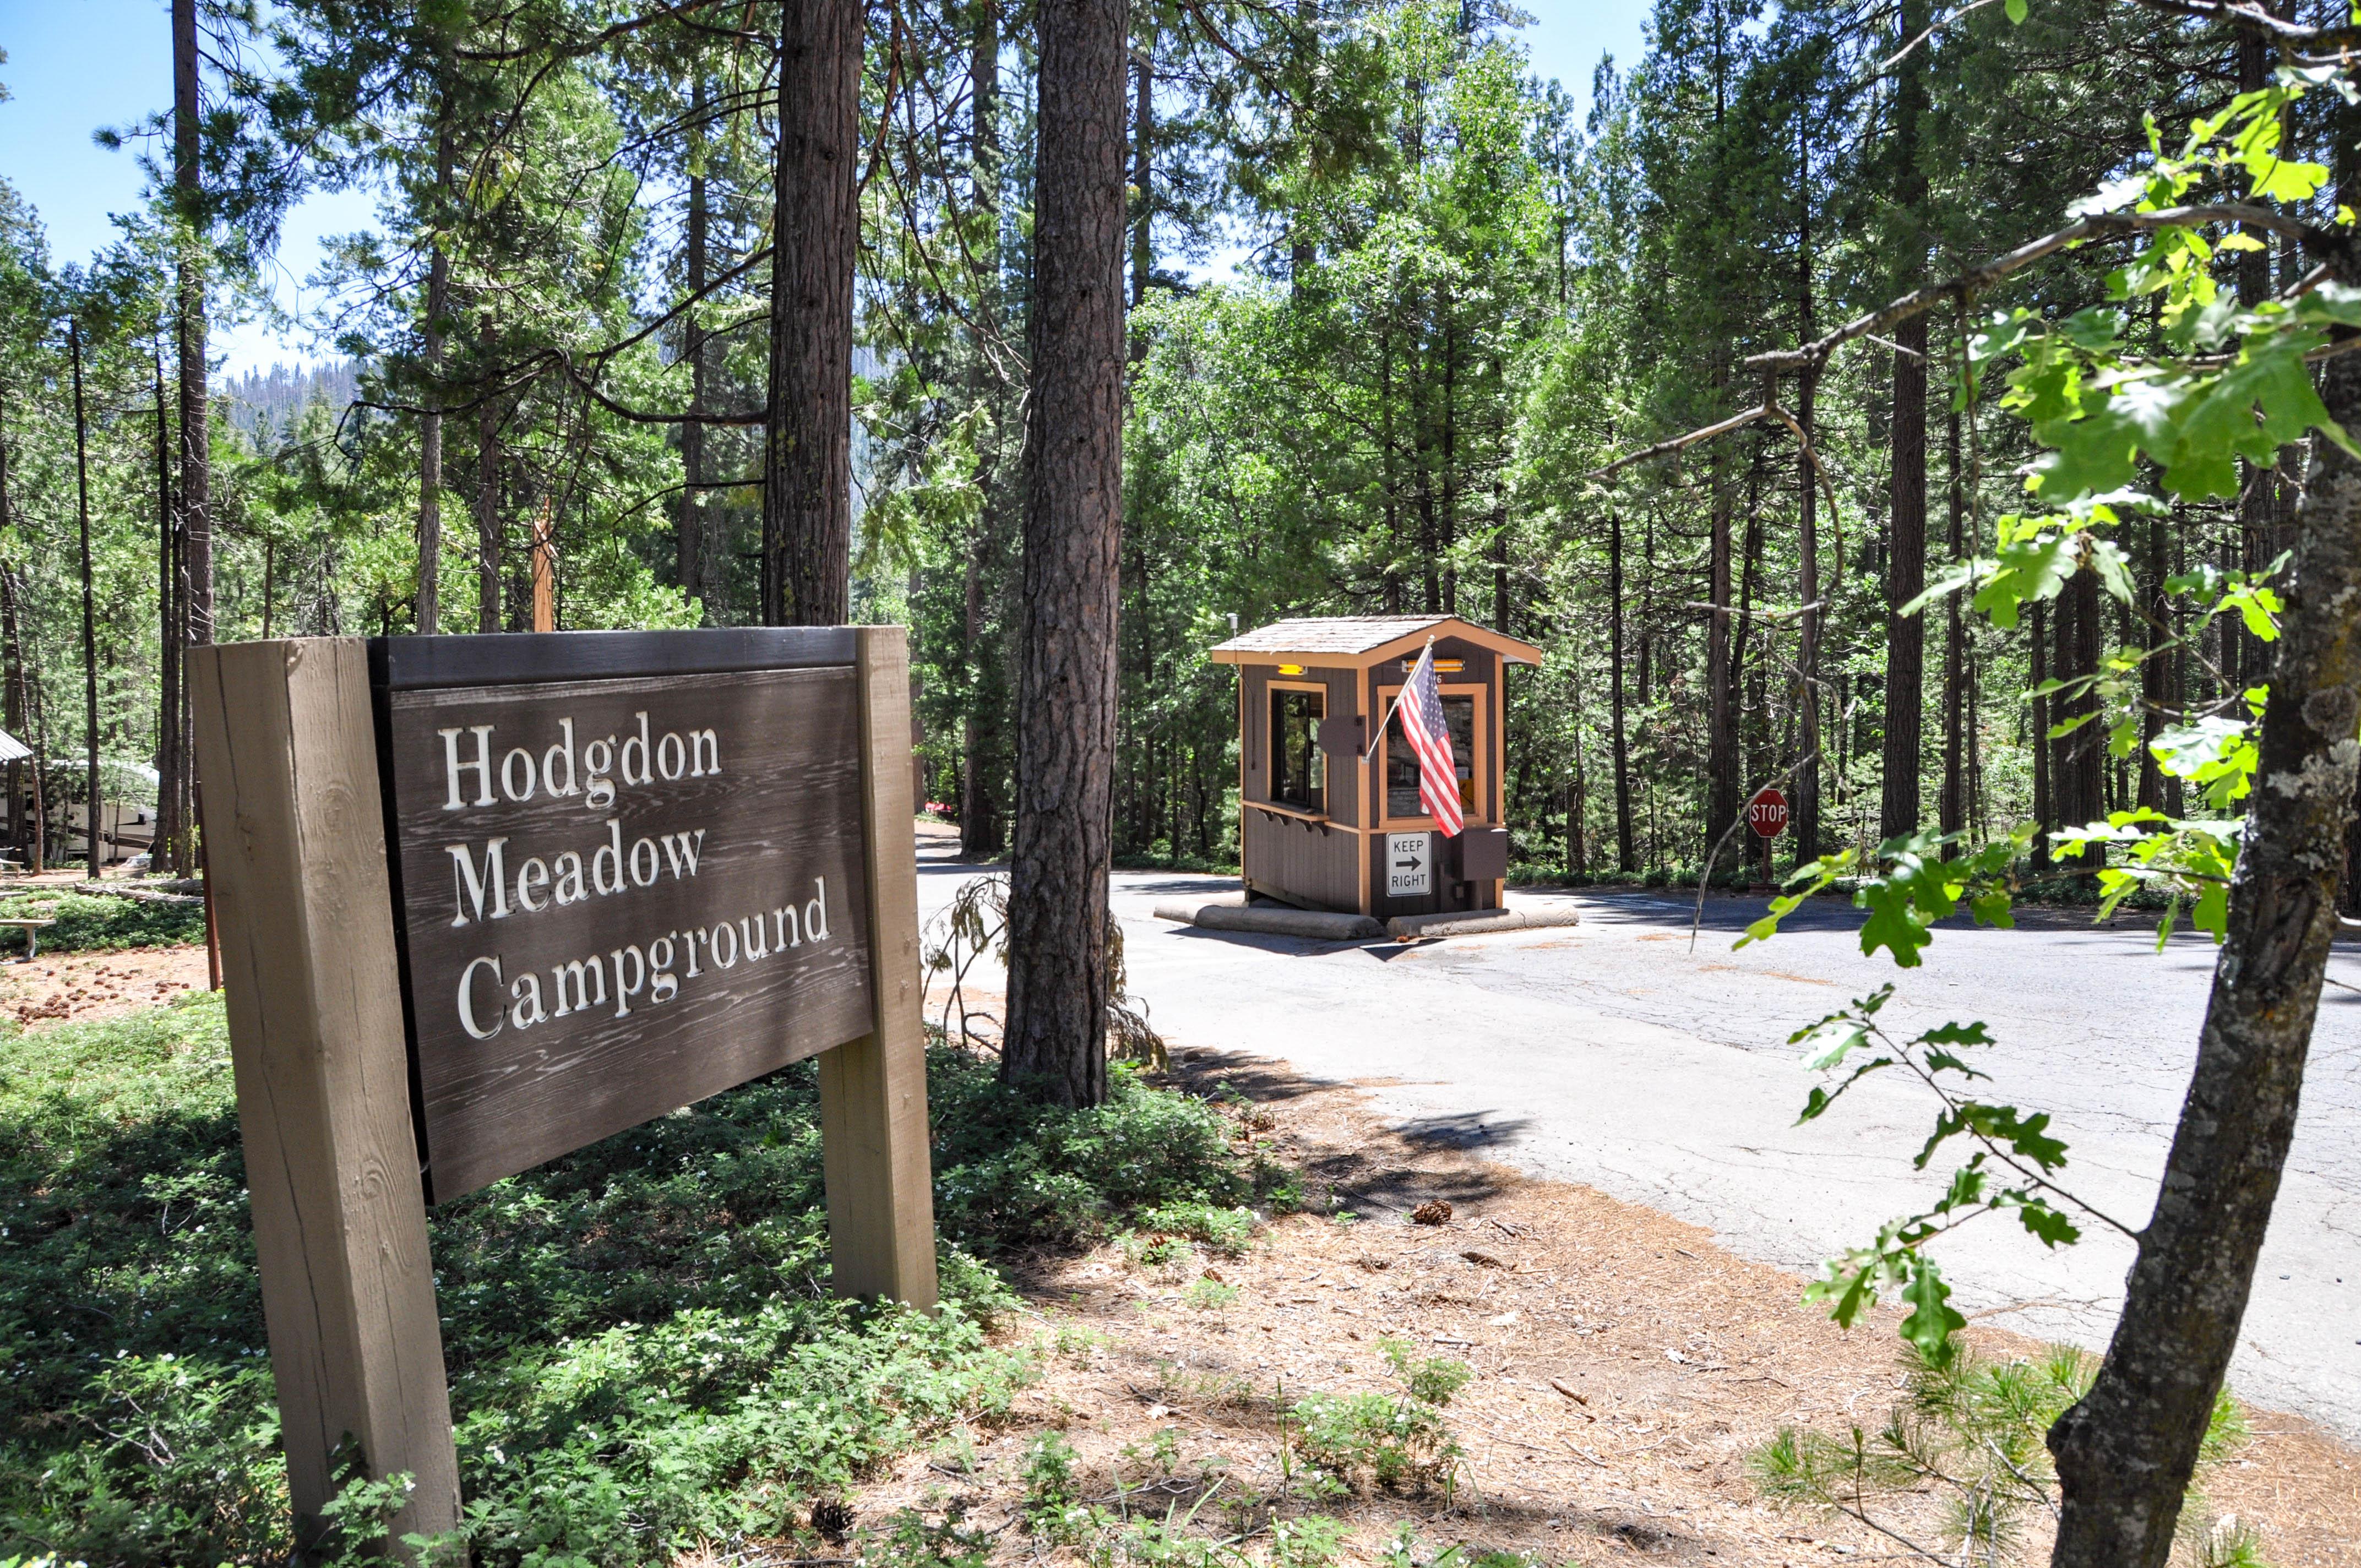 A wooden sign reads Hodgdon Meadow Campground. A kiosk is located at the entrance to the campground.